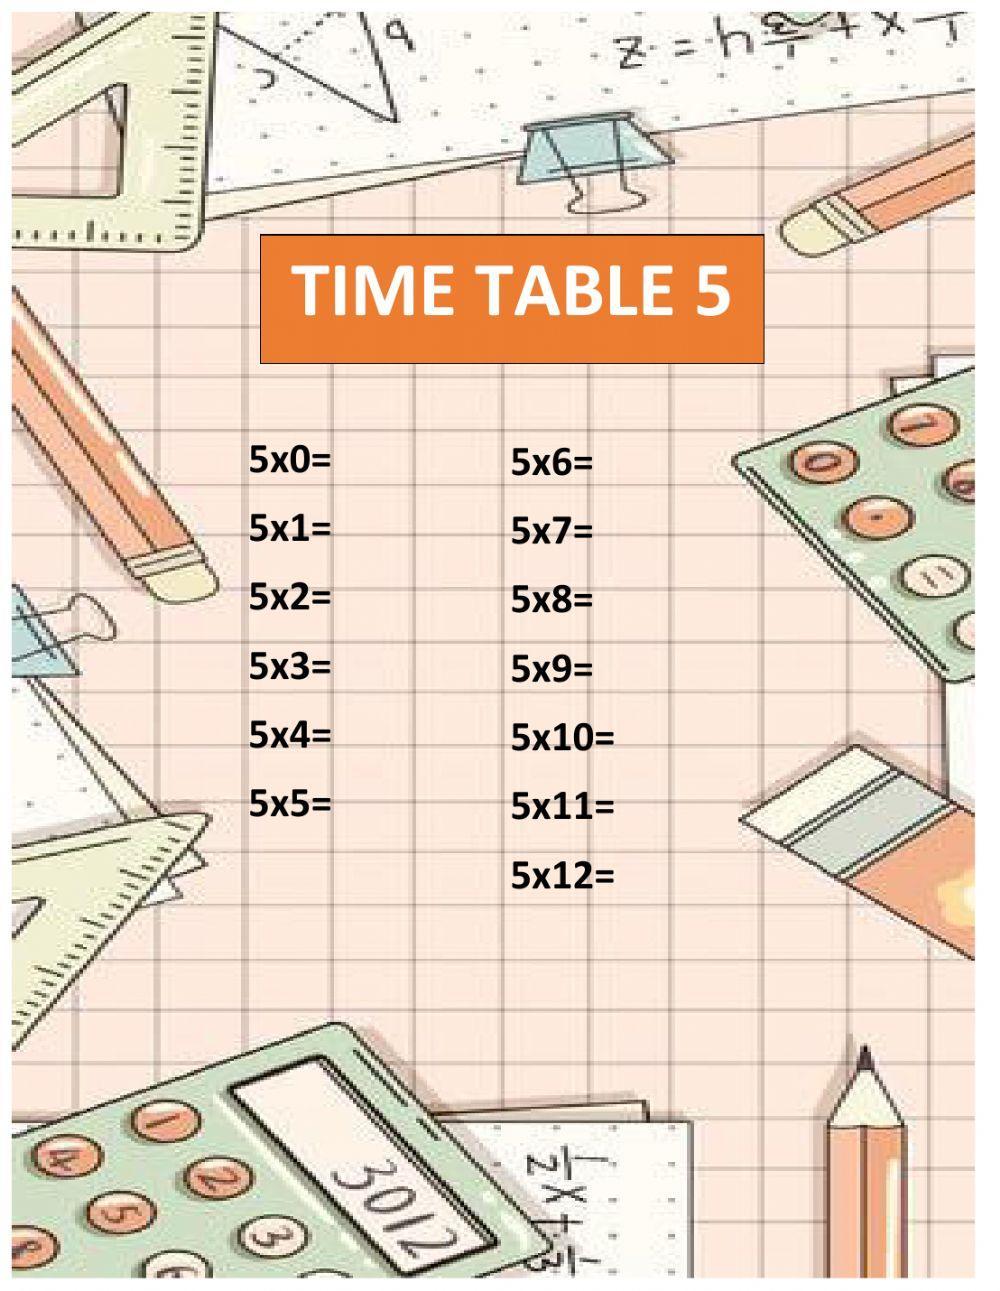 Time Table 5